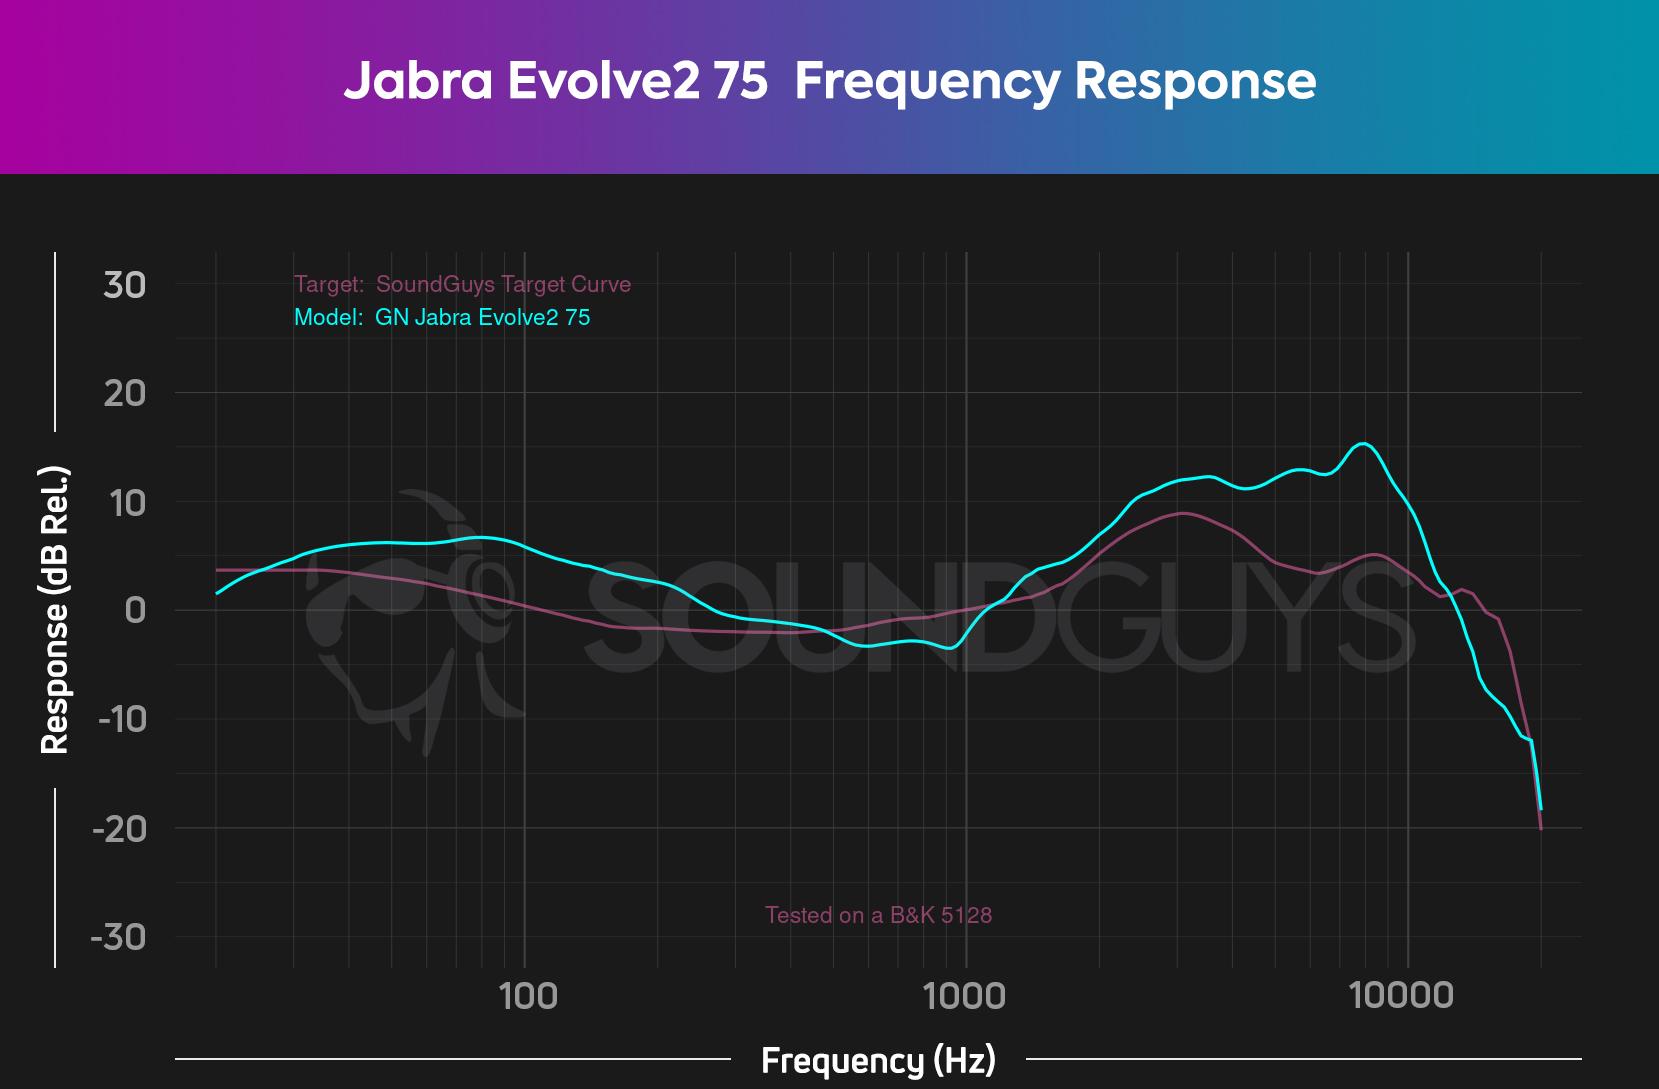 The Jabra Evolve2 75 frequency response chart showing exaggerations in both the bass and high end. 